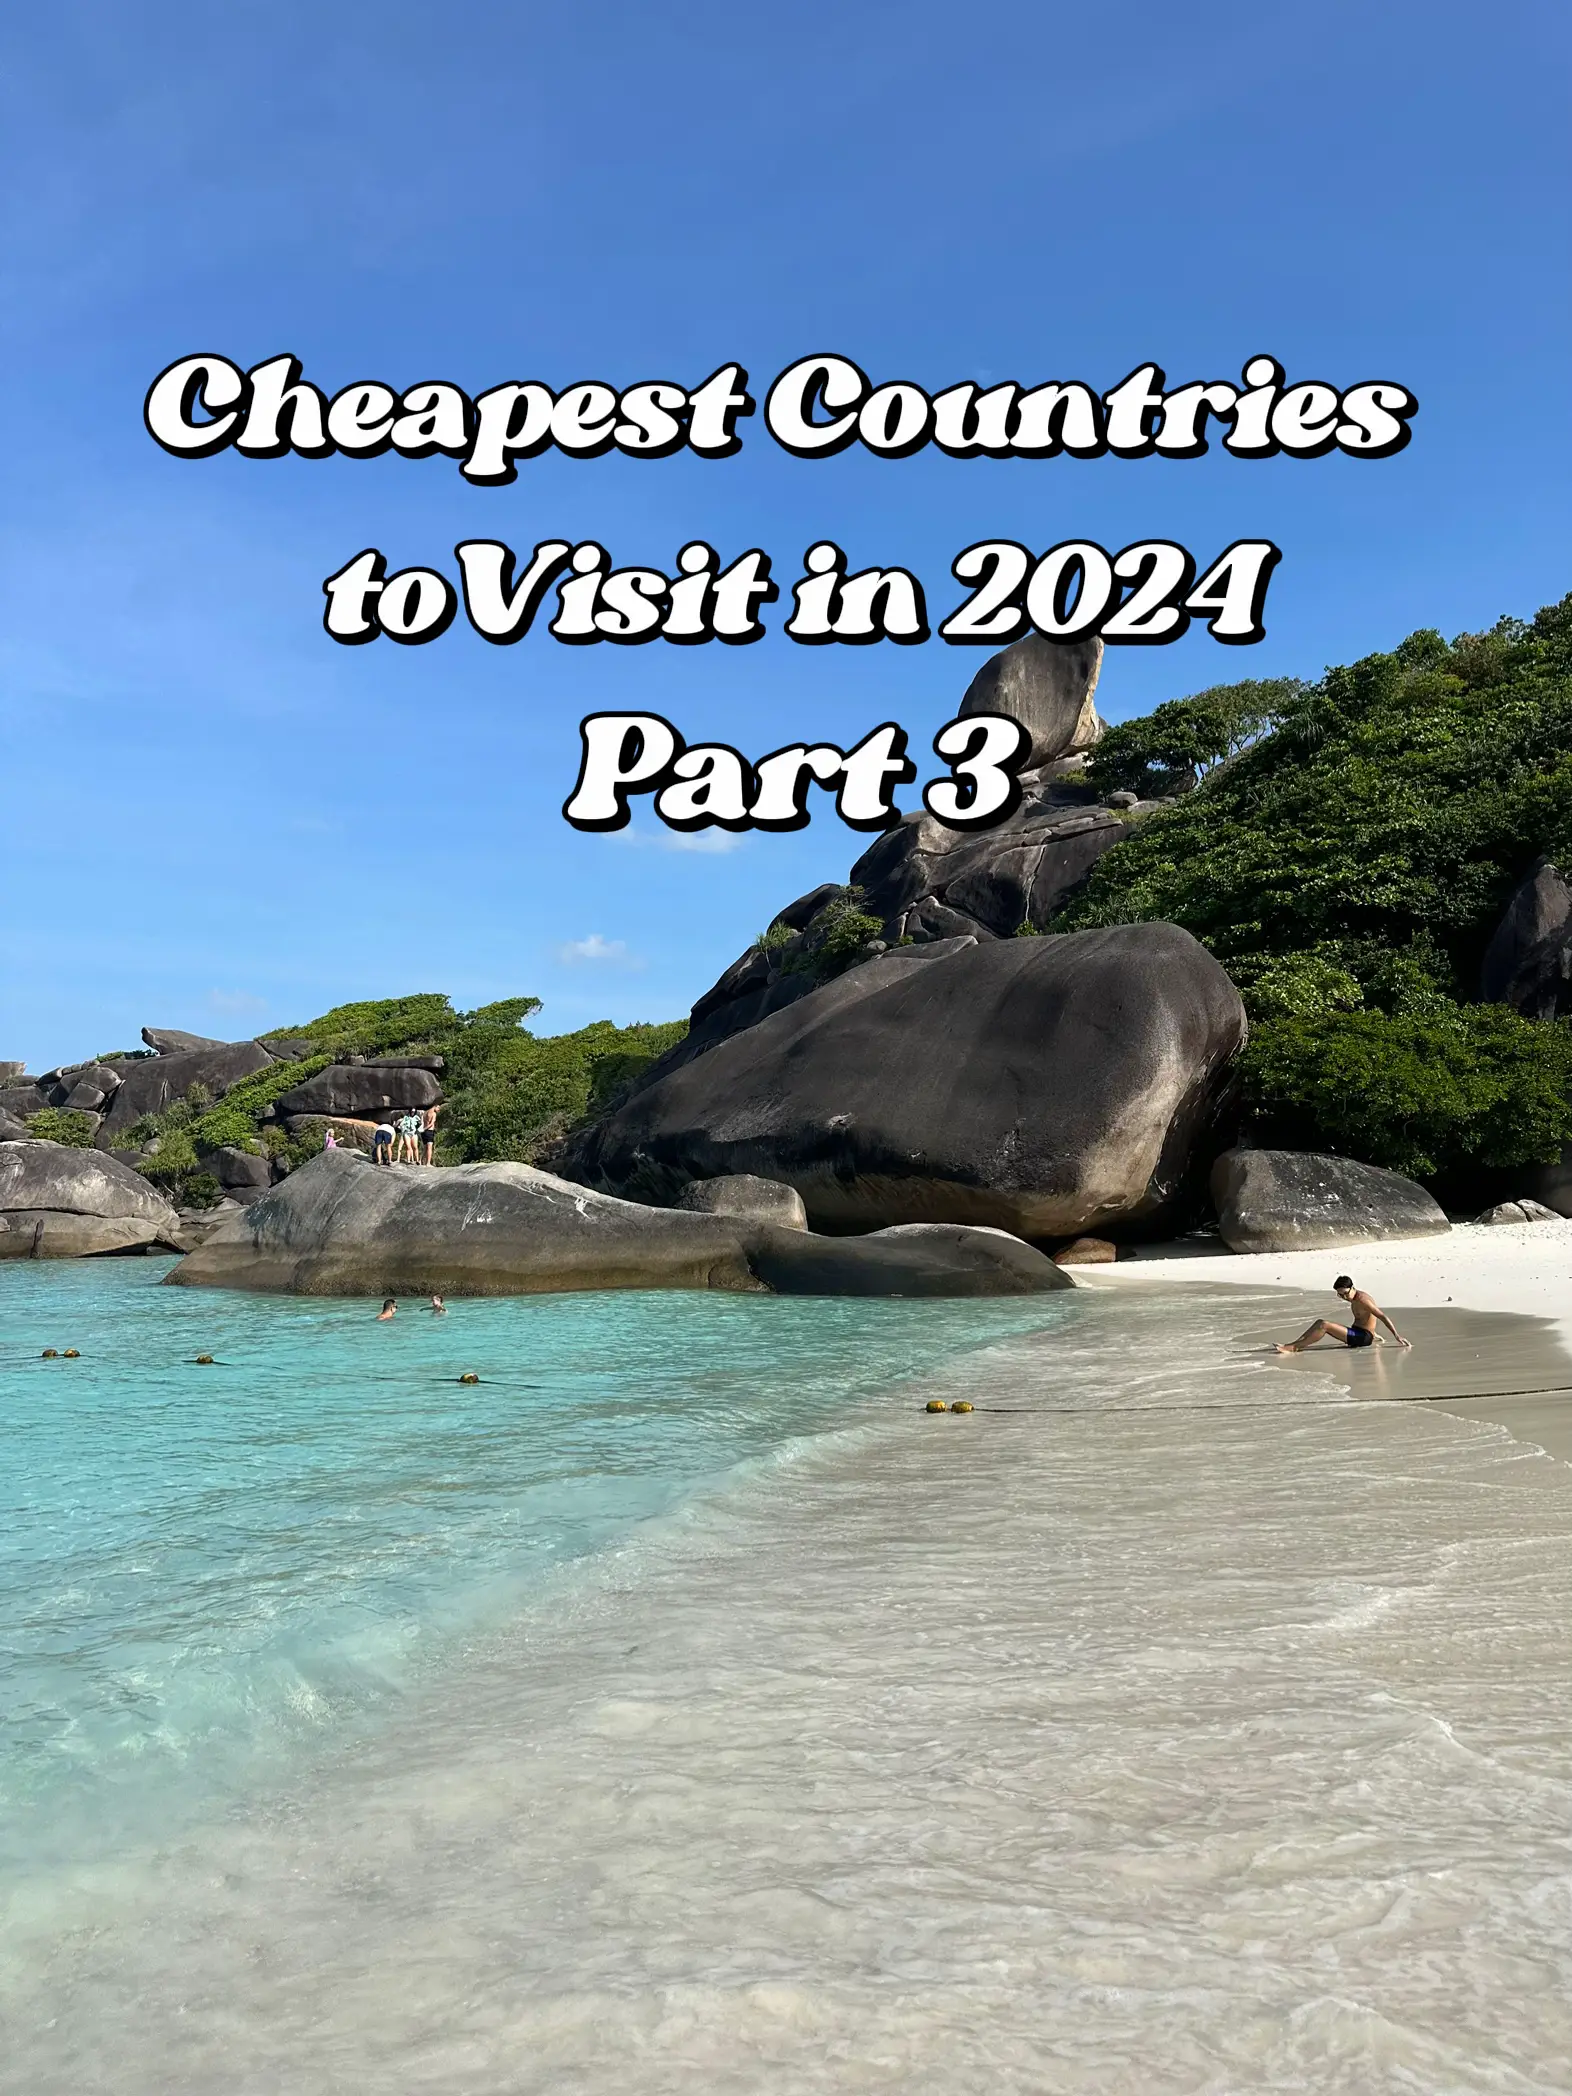  The image shows a beach with a rocky island in the background. The water is blue and clear, and there are several people enjoying the beach. The cheapest countries to visit in 2024